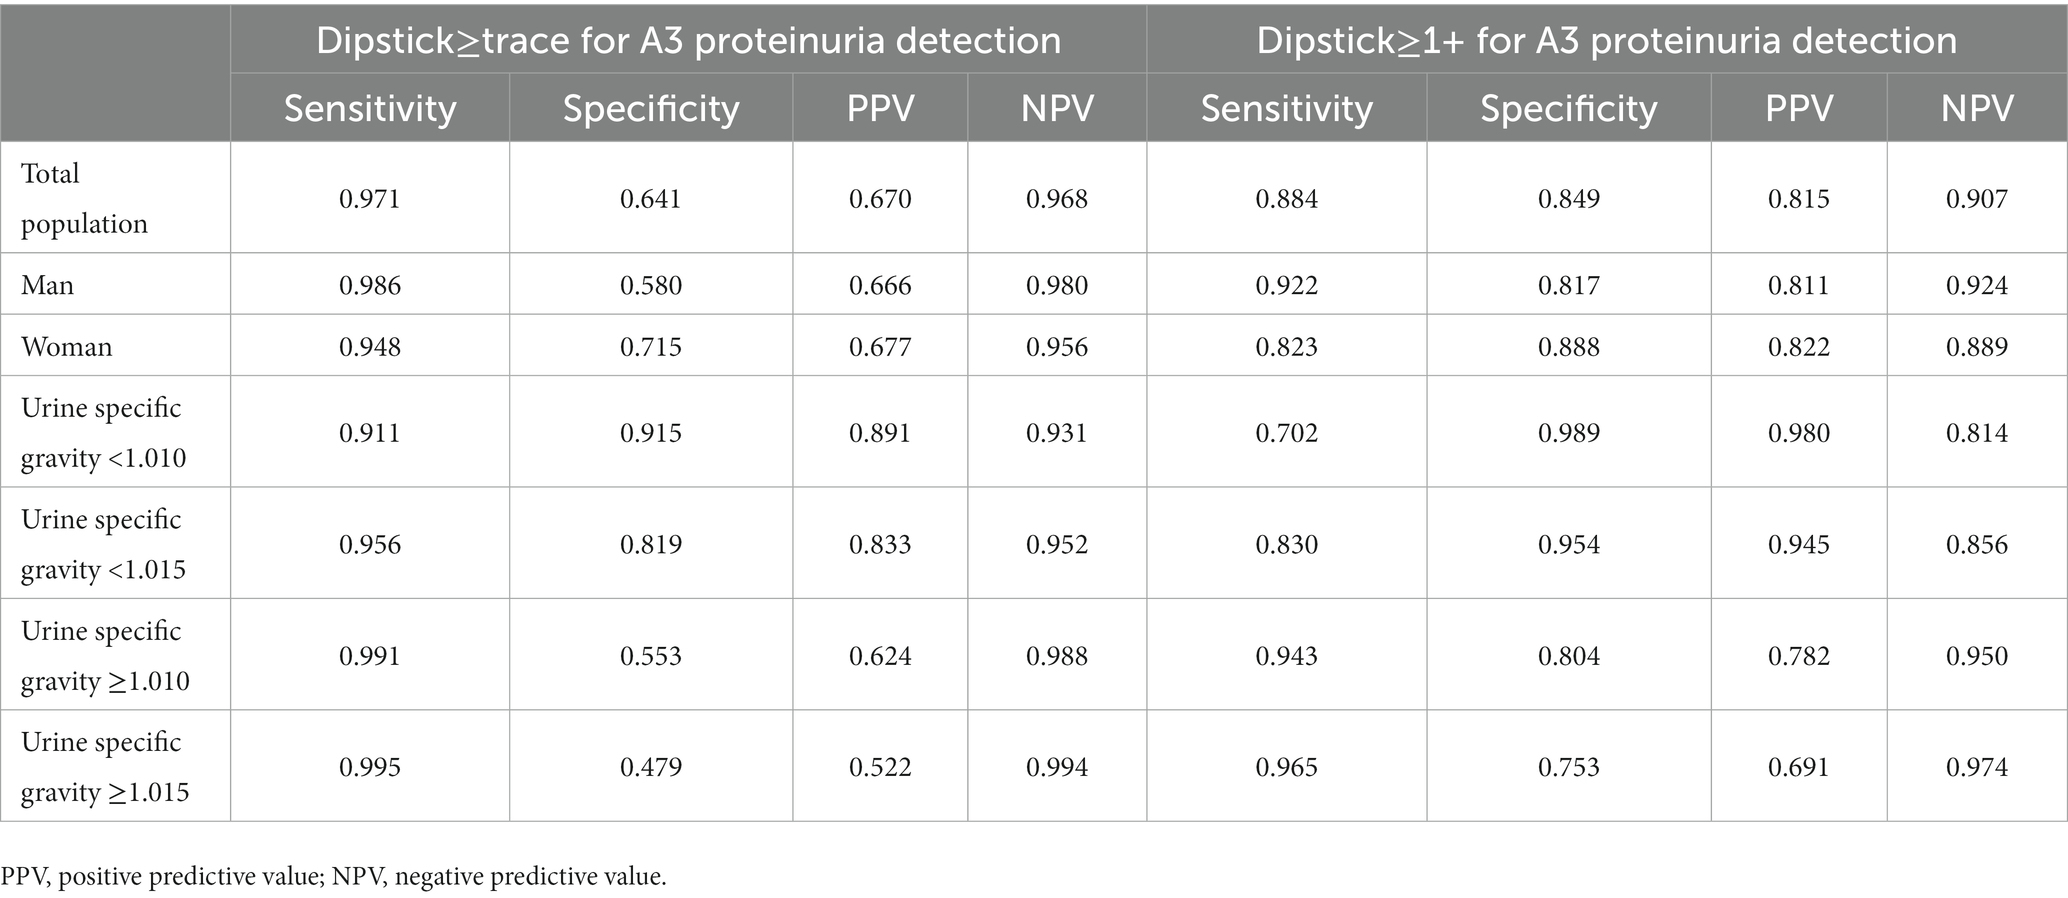 Frontiers Sex Differences In The Evaluation Of Proteinuria Using The Urine Dipstick Test 0089